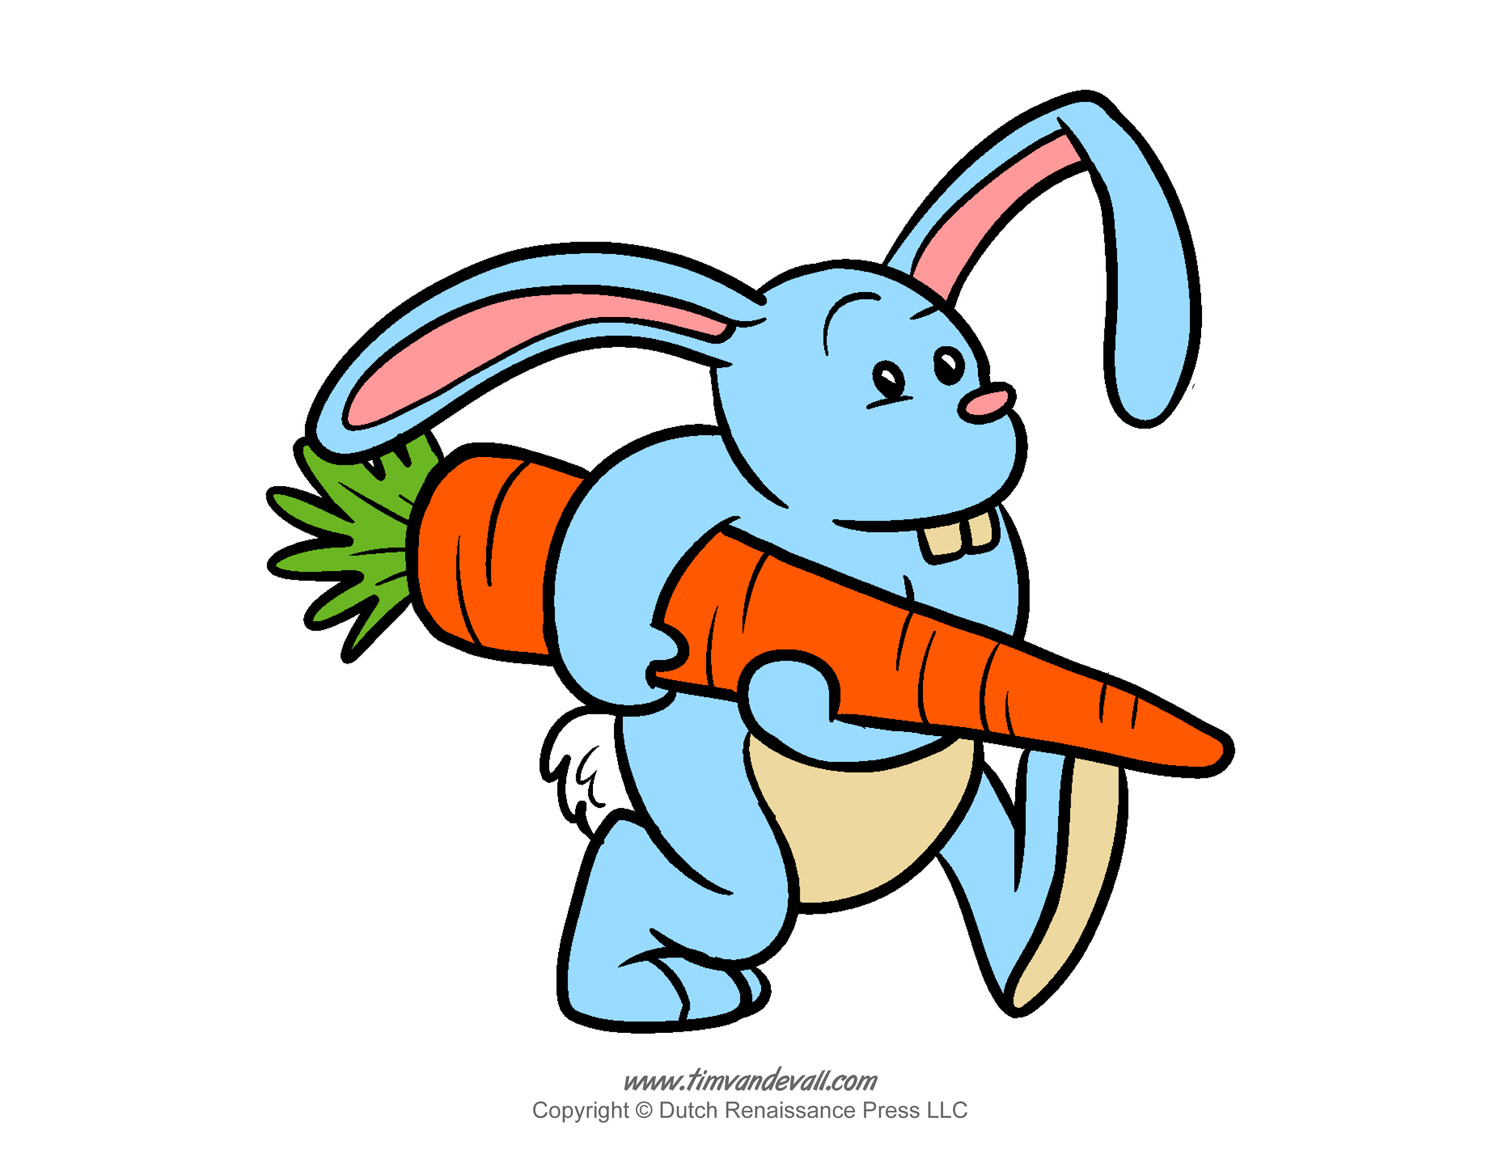 Bunny Clipart to Download - dbclipart.com